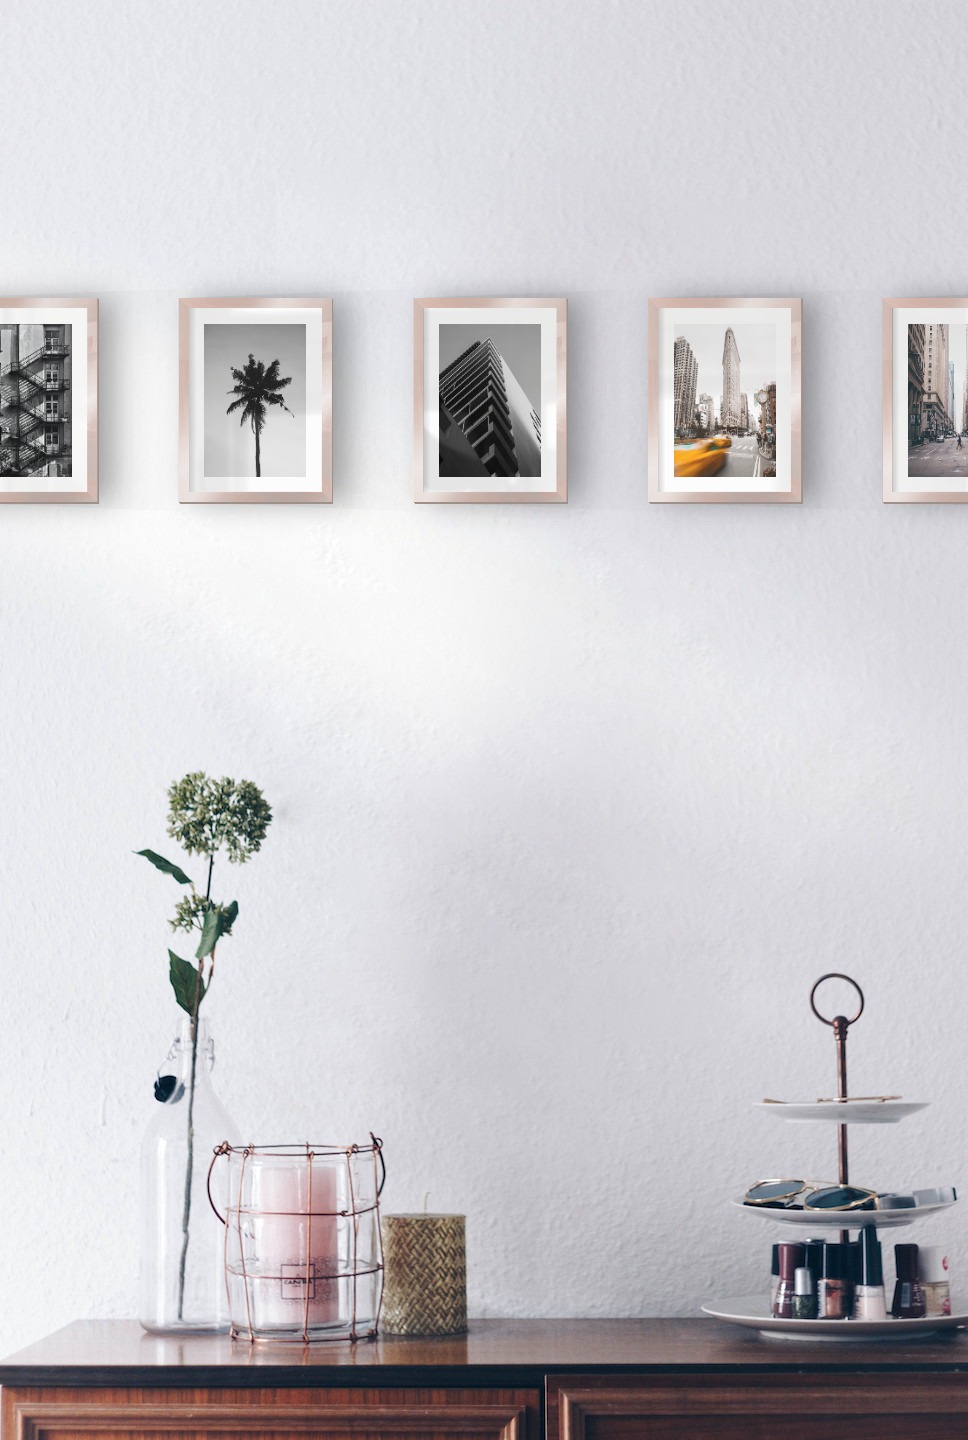 Gallery wall with picture frames in copper in sizes 13x18 with prints "Stairs on the facade", "Palm", "Black and white building", "Yellow taxis in town" and "Man walking across the street"